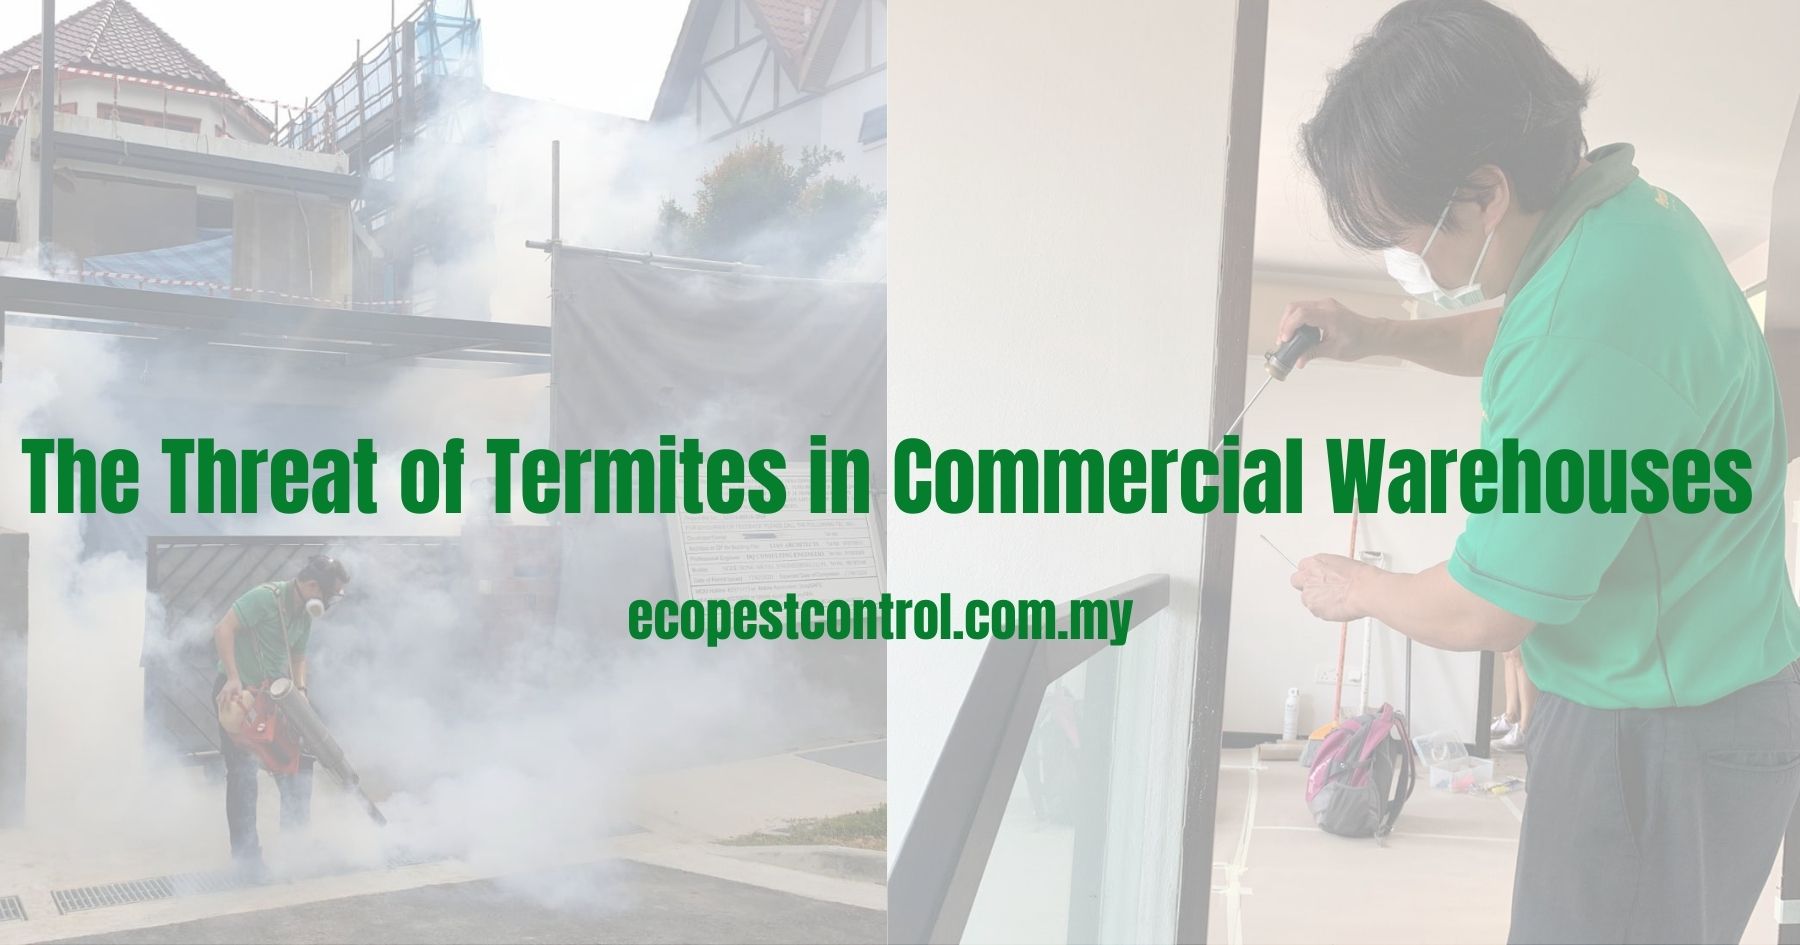 The Threat of Termites in Commercial Warehouses